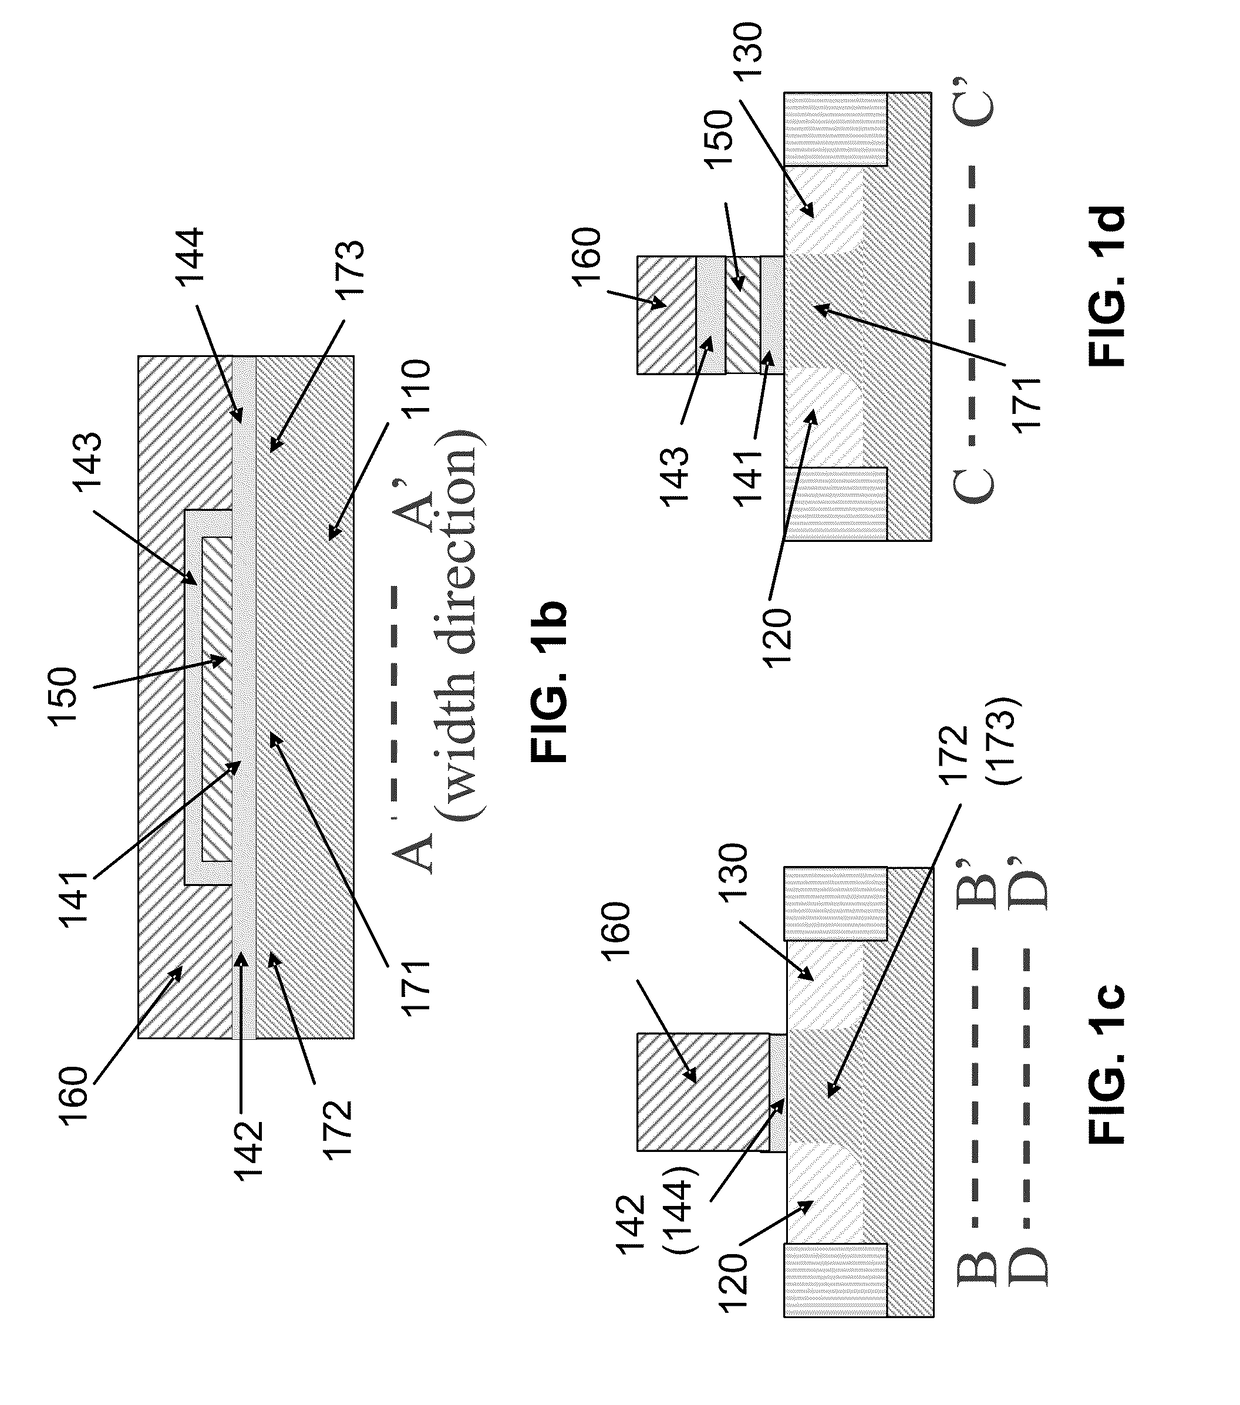 3-D electrically programmable and erasable single-transistor non-volatile semiconductor memory device